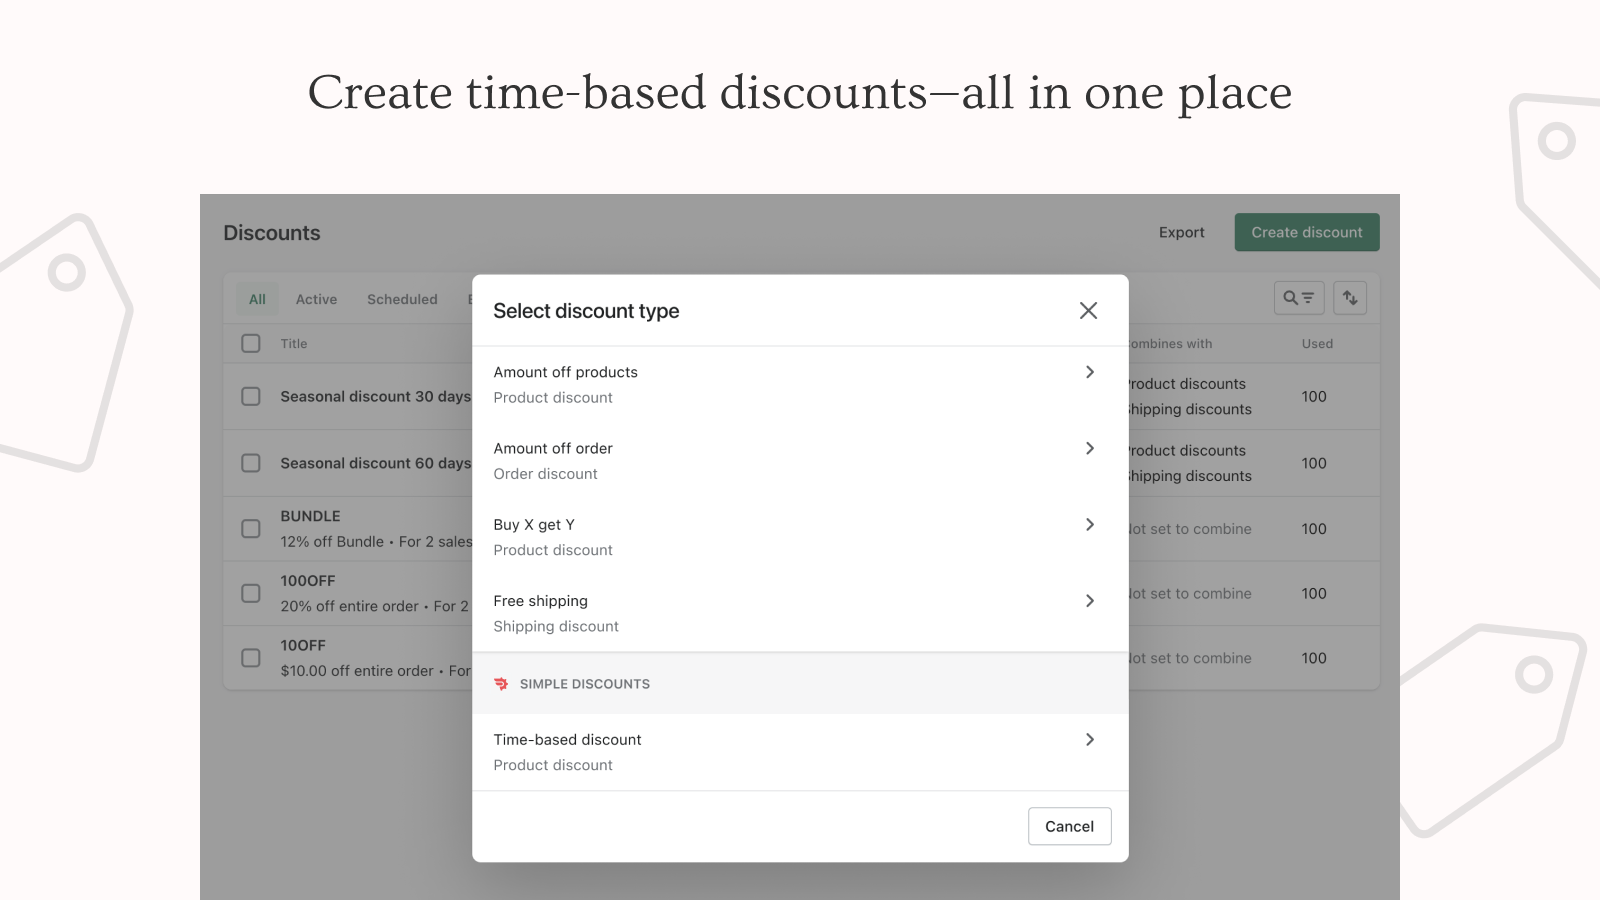 Create time-based discounts—all in one place